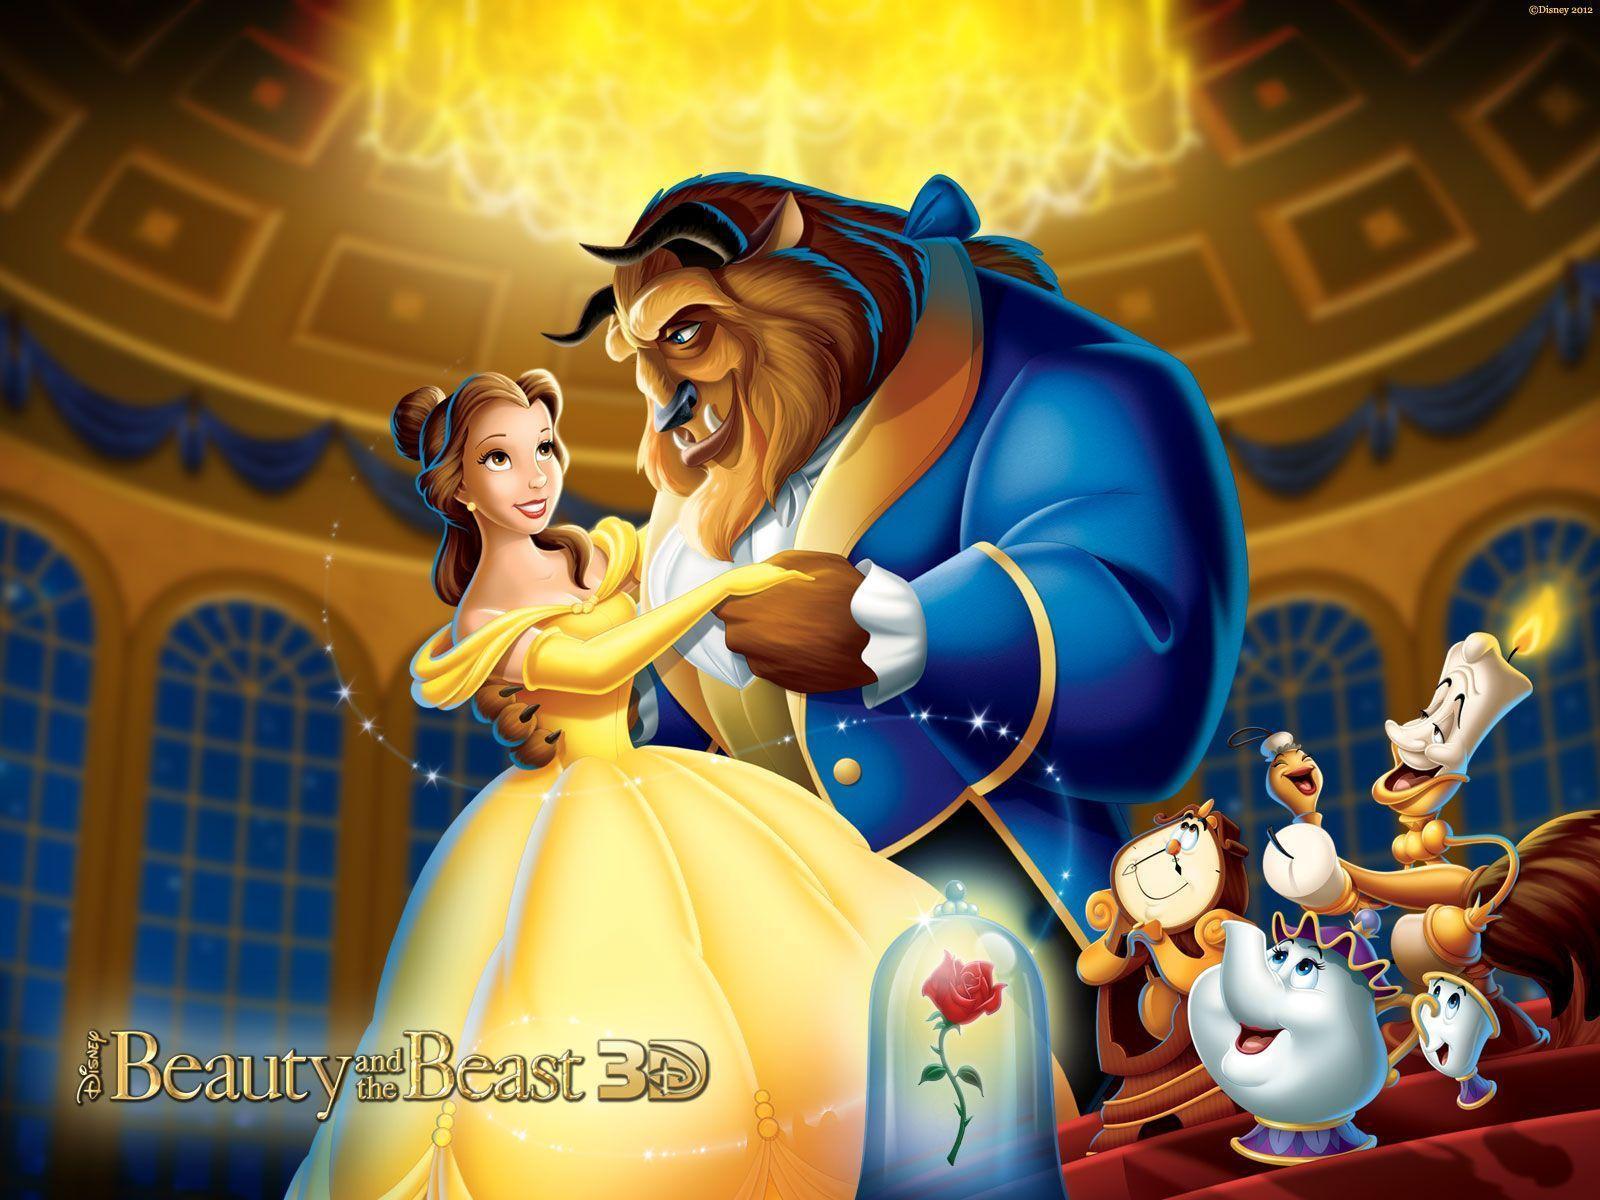 Beauty and the Beast 3D: See it in Cinemas